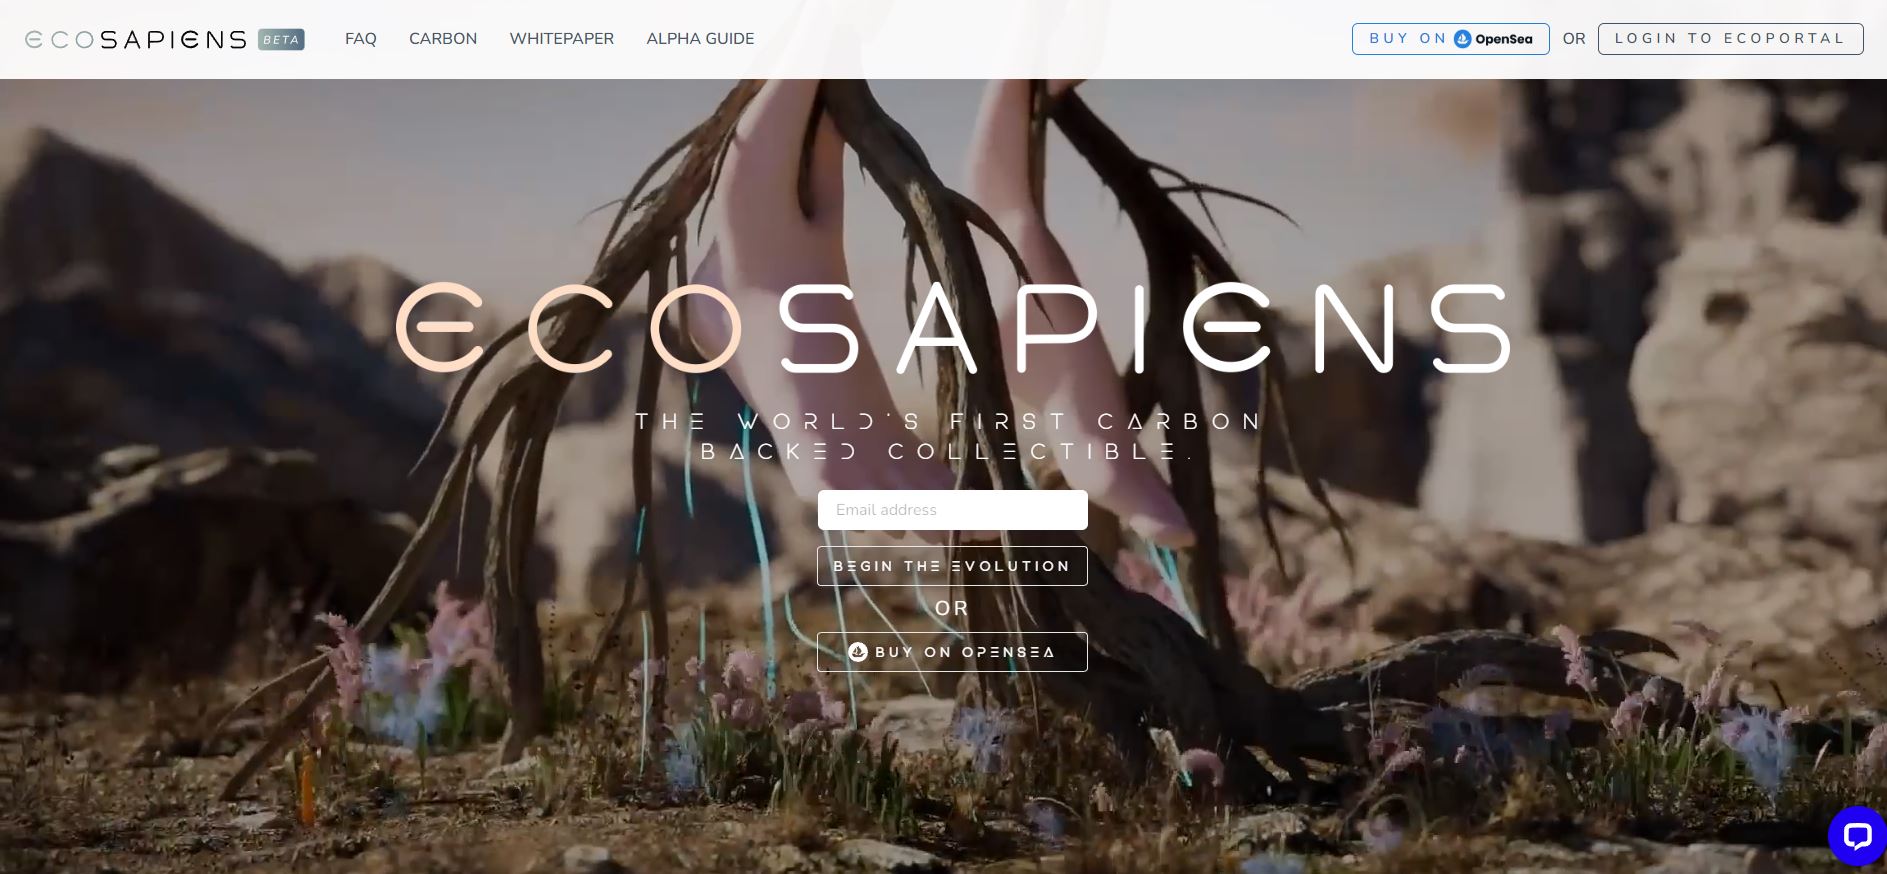 Ecosapiens, the world’s first carbon-backed collectible raised $3.5 million in seed funding